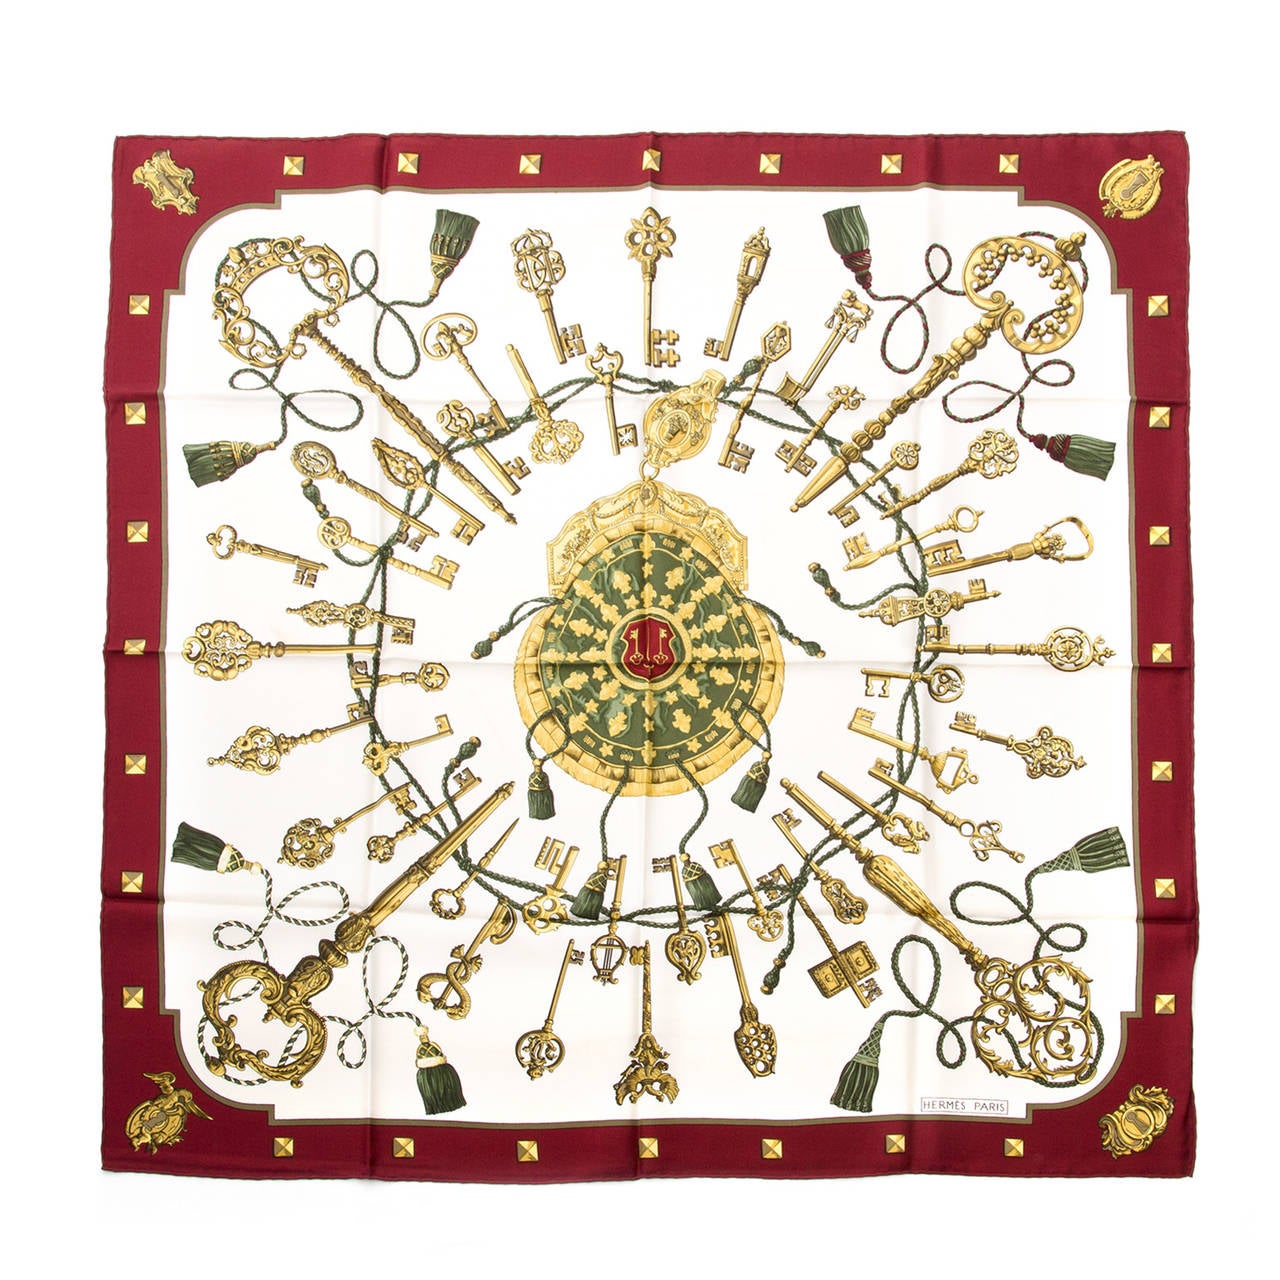 This Hermès scarf is made out of 100% silk. Printed with keys in cream, burgundy and gold.